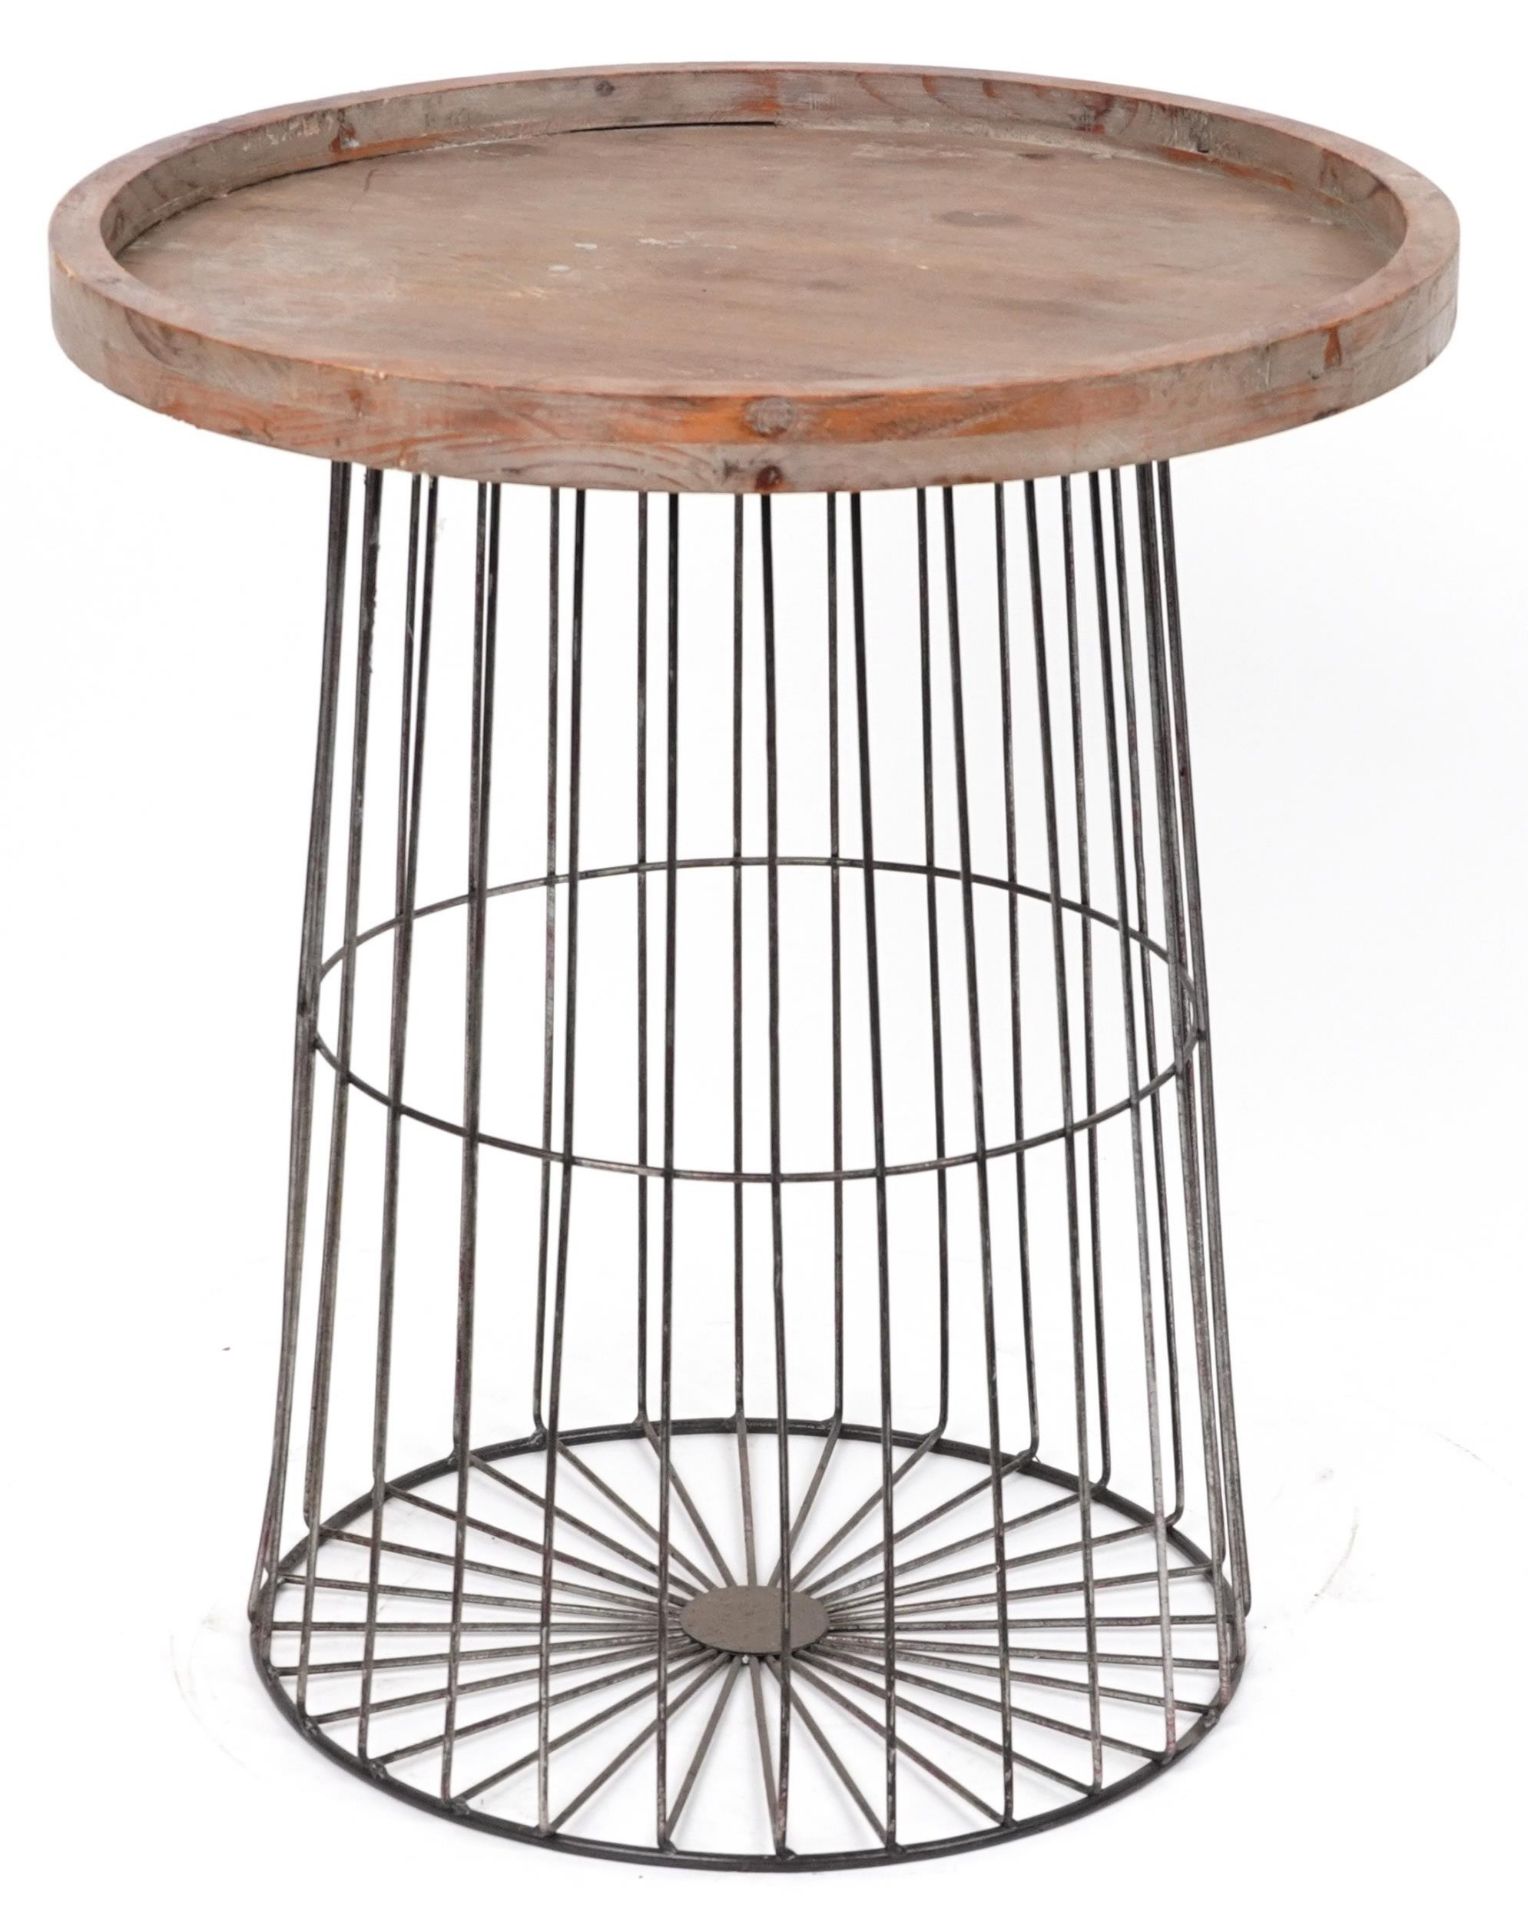 Menzies, industrial oak and caged gun metal side table, 58.5cm high x 52cm in diameter : For further